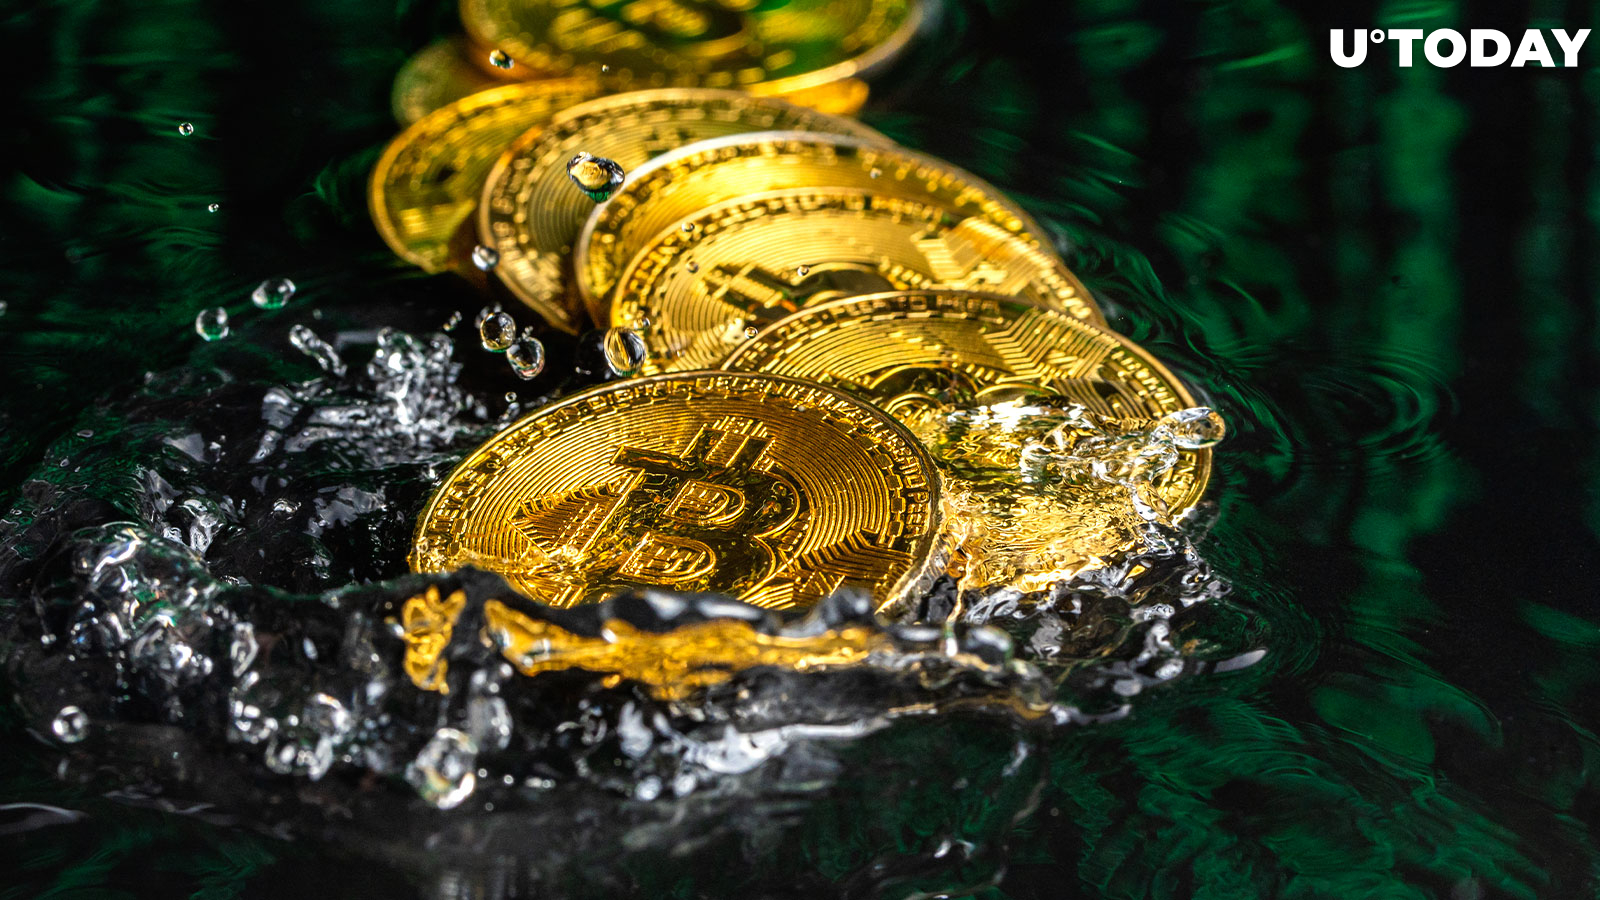  Bitcoin Mining Exceeds New York City's Annual Water Use: Report